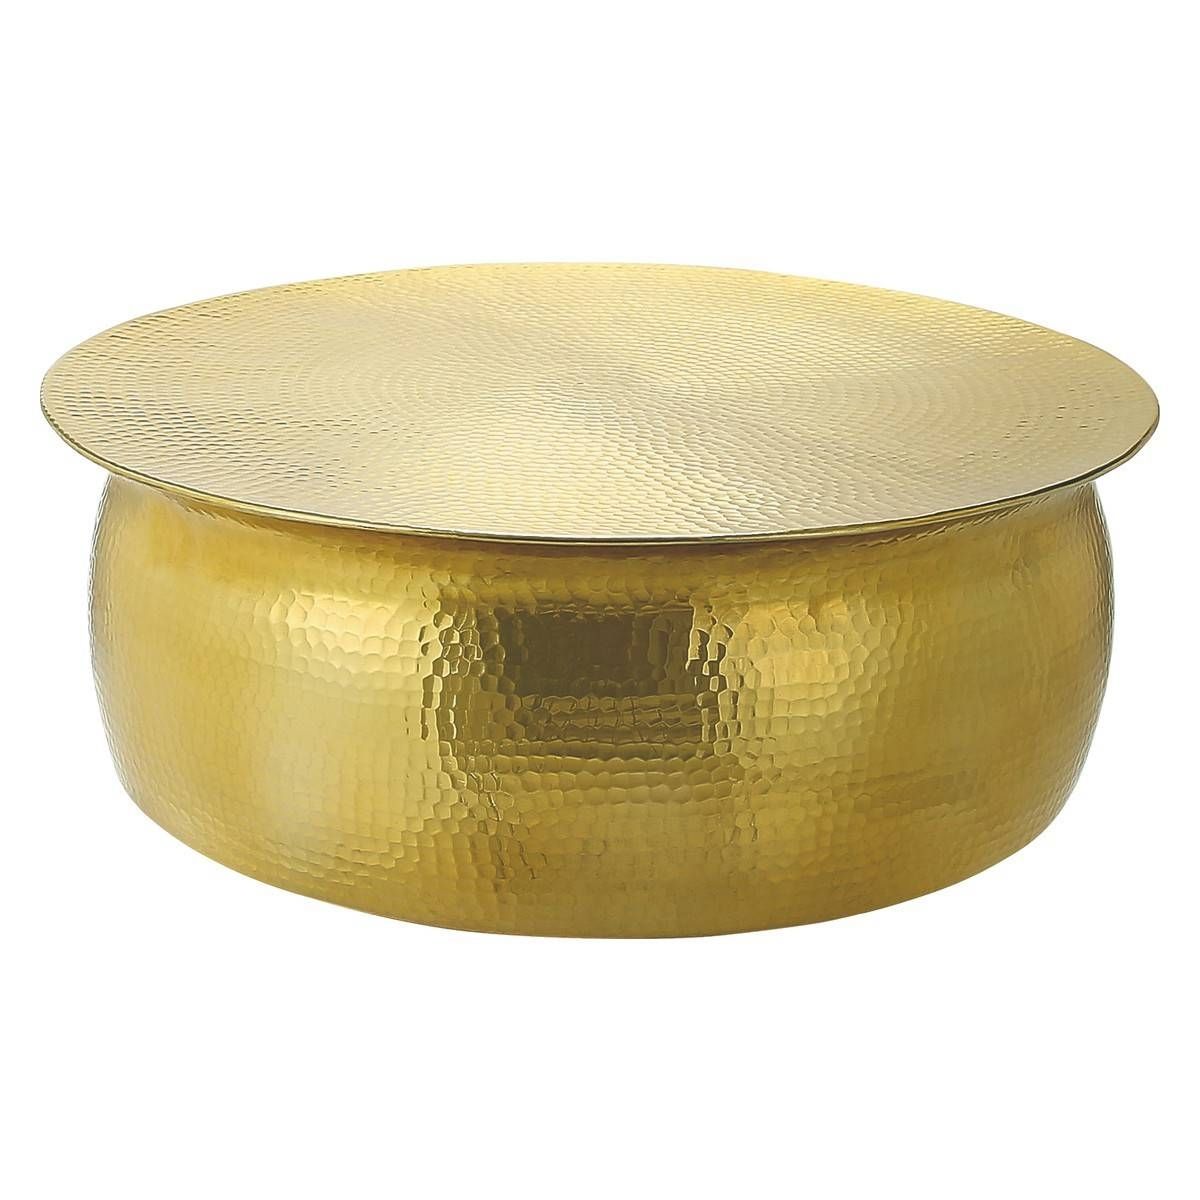 Orrico Brass Hammered Aluminium Coffee Table | Buy Now At Habitat Uk Inside Aluminium Coffee Tables (View 19 of 30)